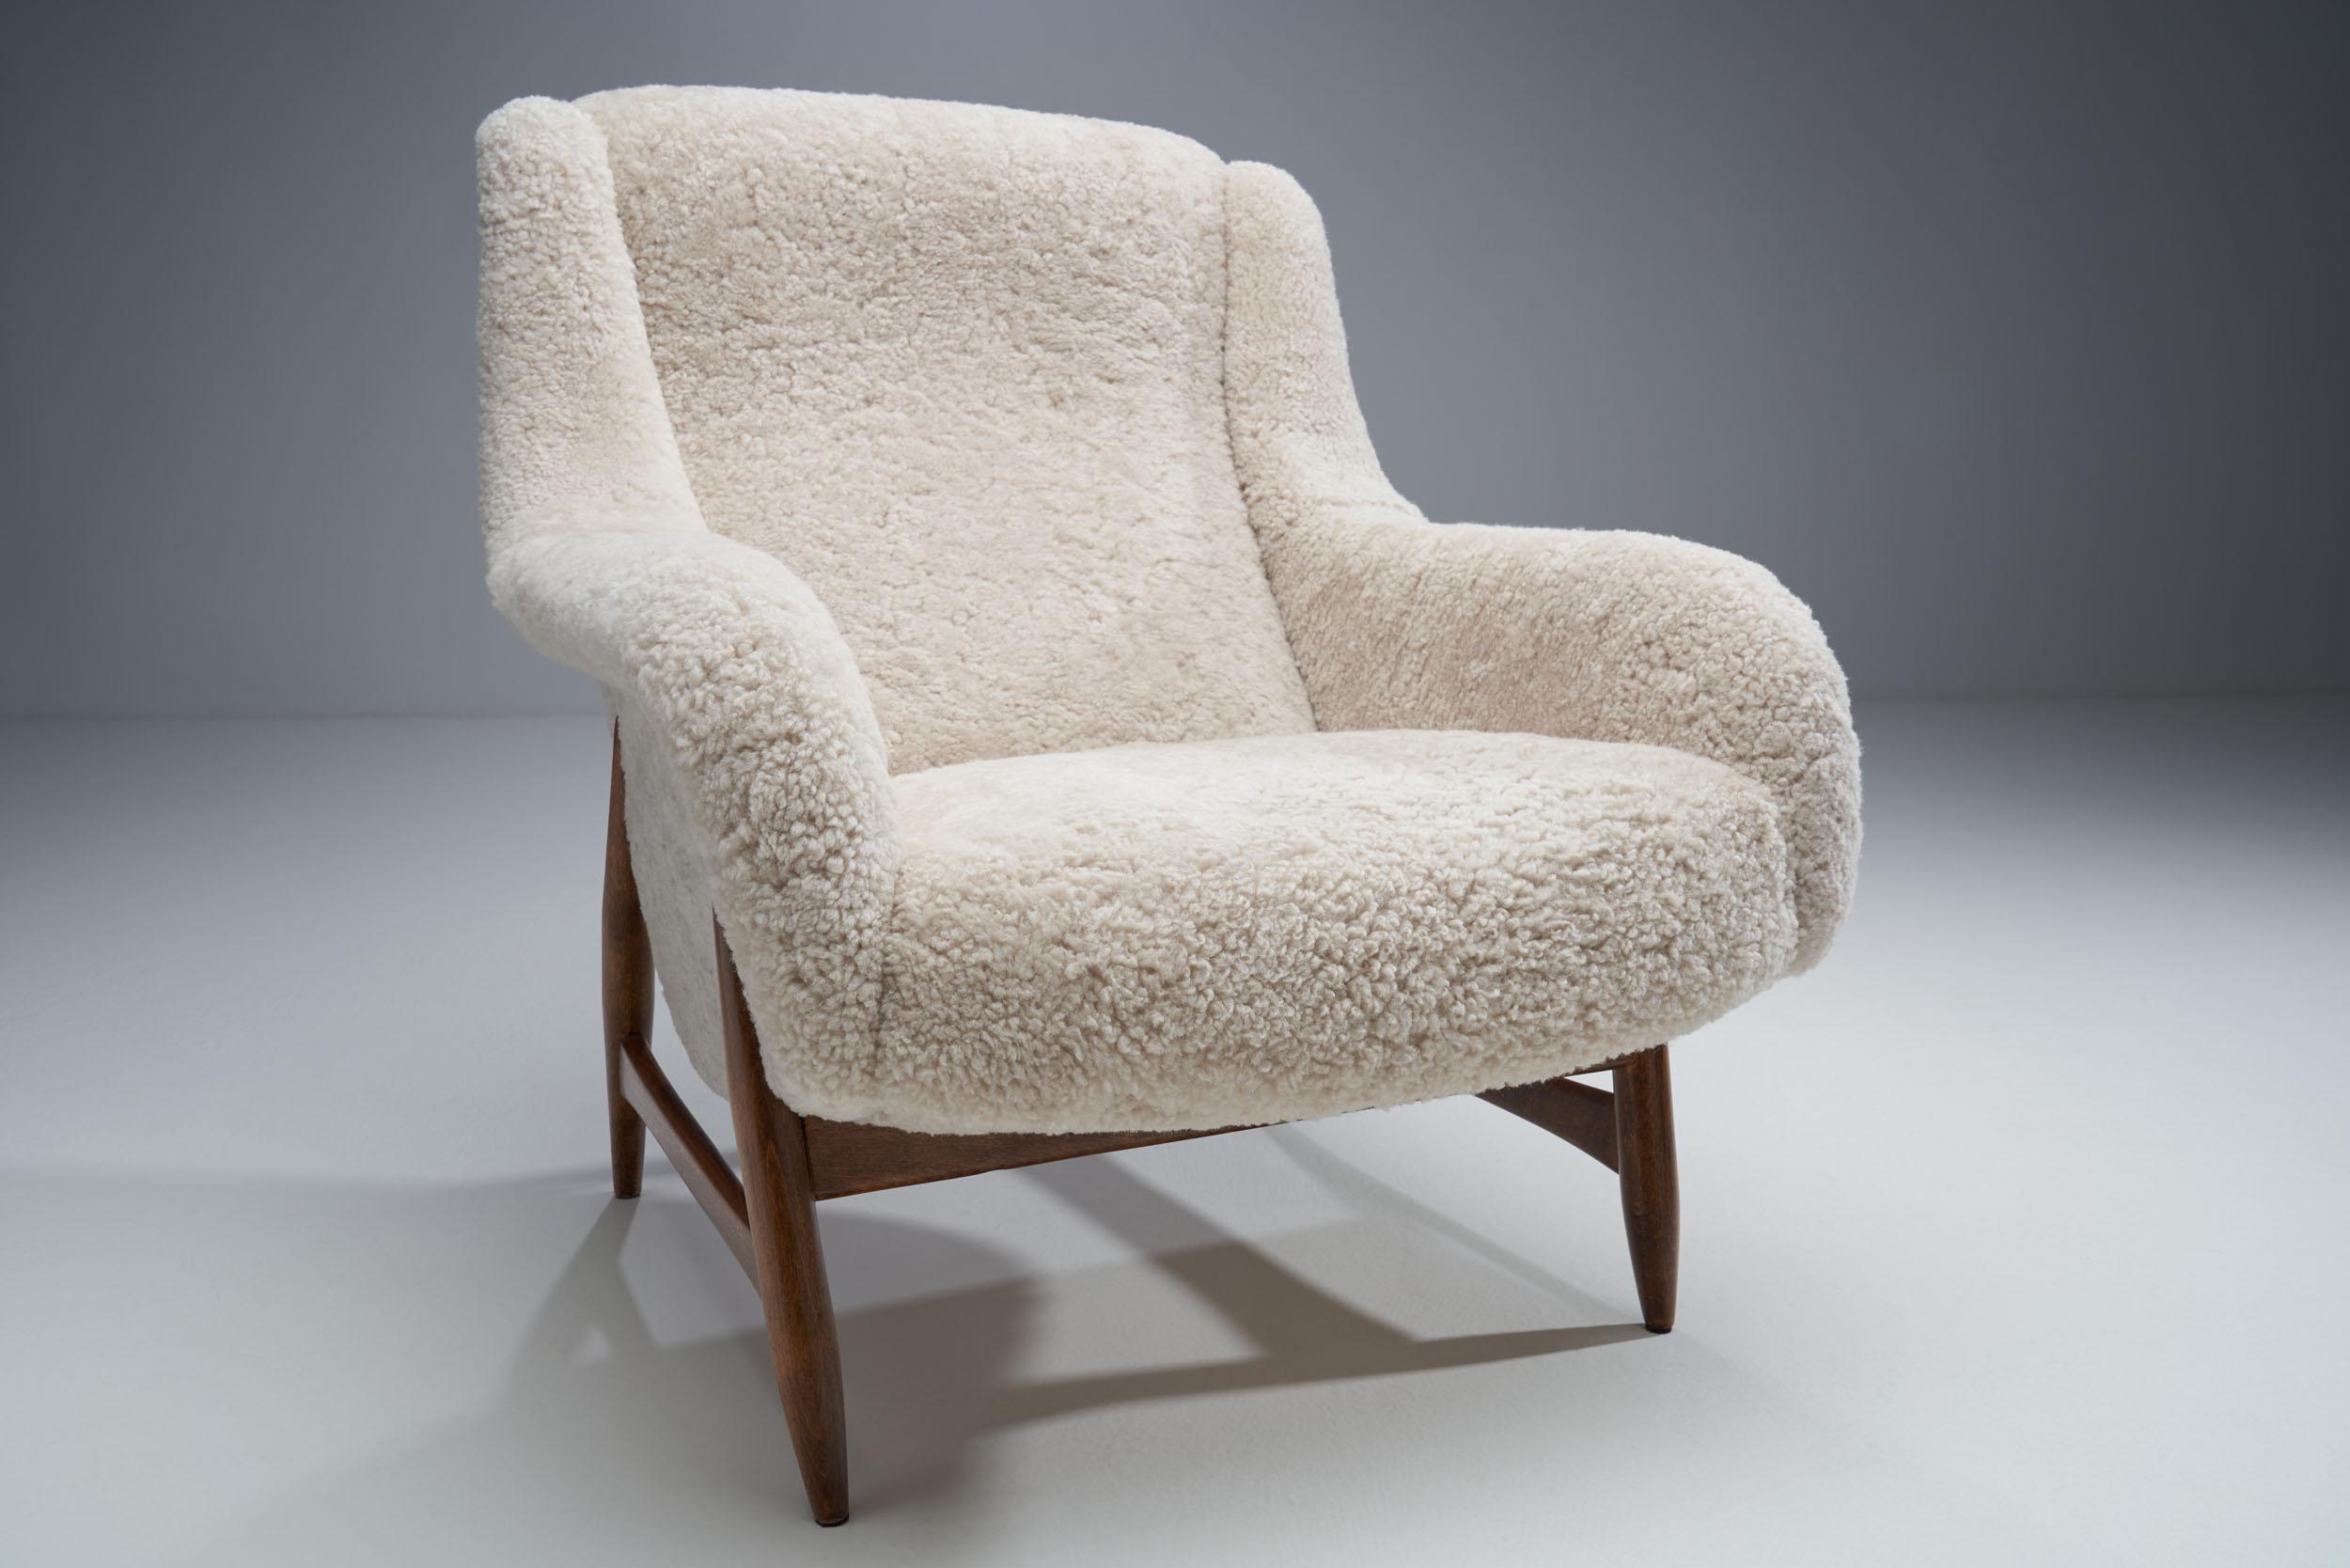 Sheepskin Rare Lounge Chair by Bengt Ruda for Artifort, the Netherlands, 1960s